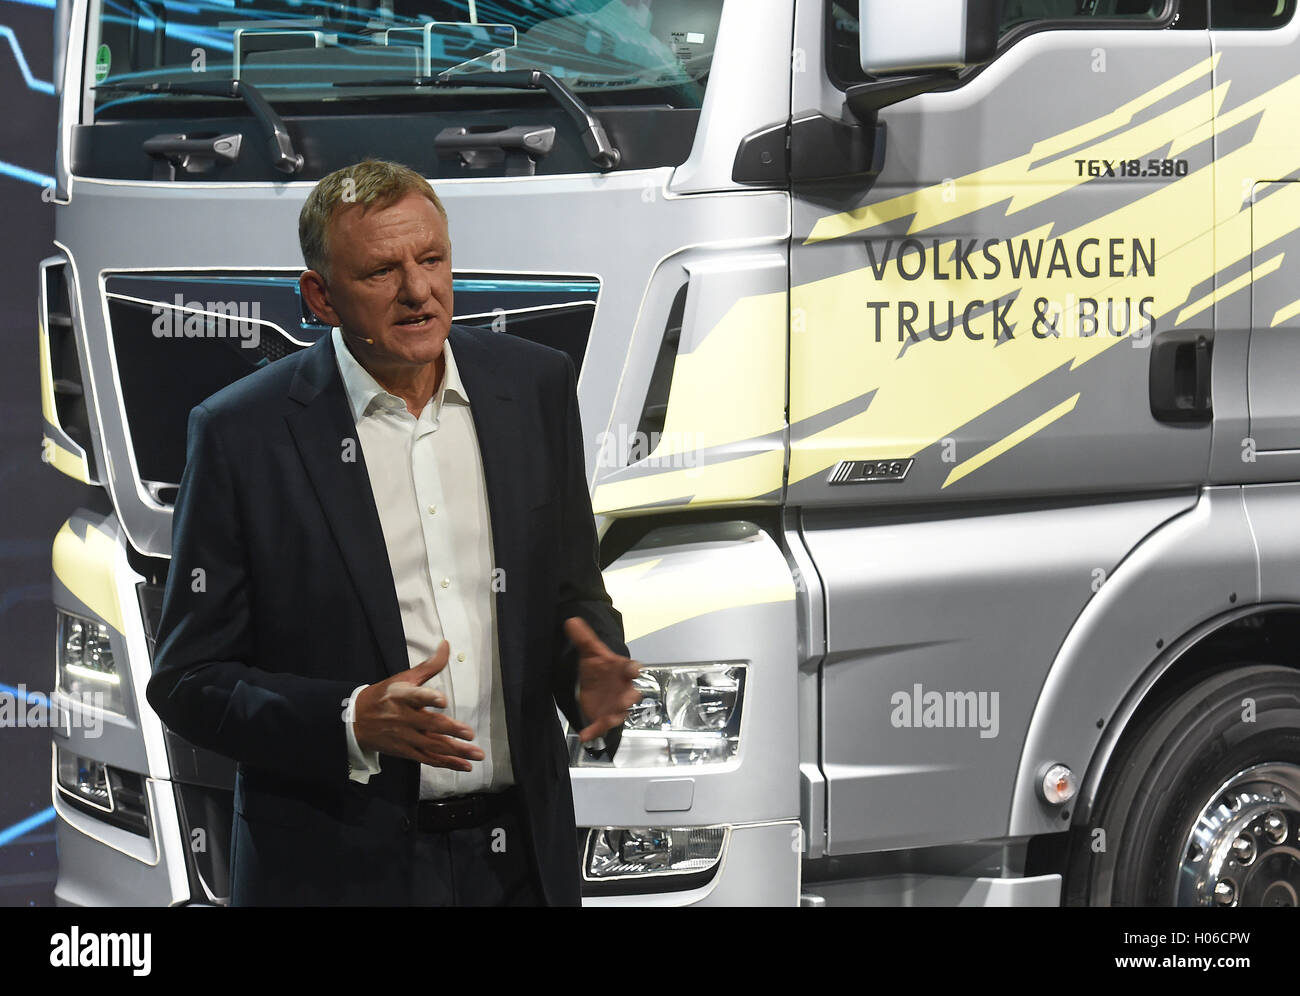 Andreas Renschler (l), VW board member responsible for commercial vehicles, speaking to the media at the Volkswagen Truck & Bus Start-Up Night in Hanover, Germany, 20 September 2016. Before the start of the IAA, innovative products, services, and topics will be presented by MAN, Scania, Volkswagen Caminhoes e Onibus and Volkswagen Commercial Vehicles.    PHOTO: HOLGER HOLLEMANN/DPA Stock Photo